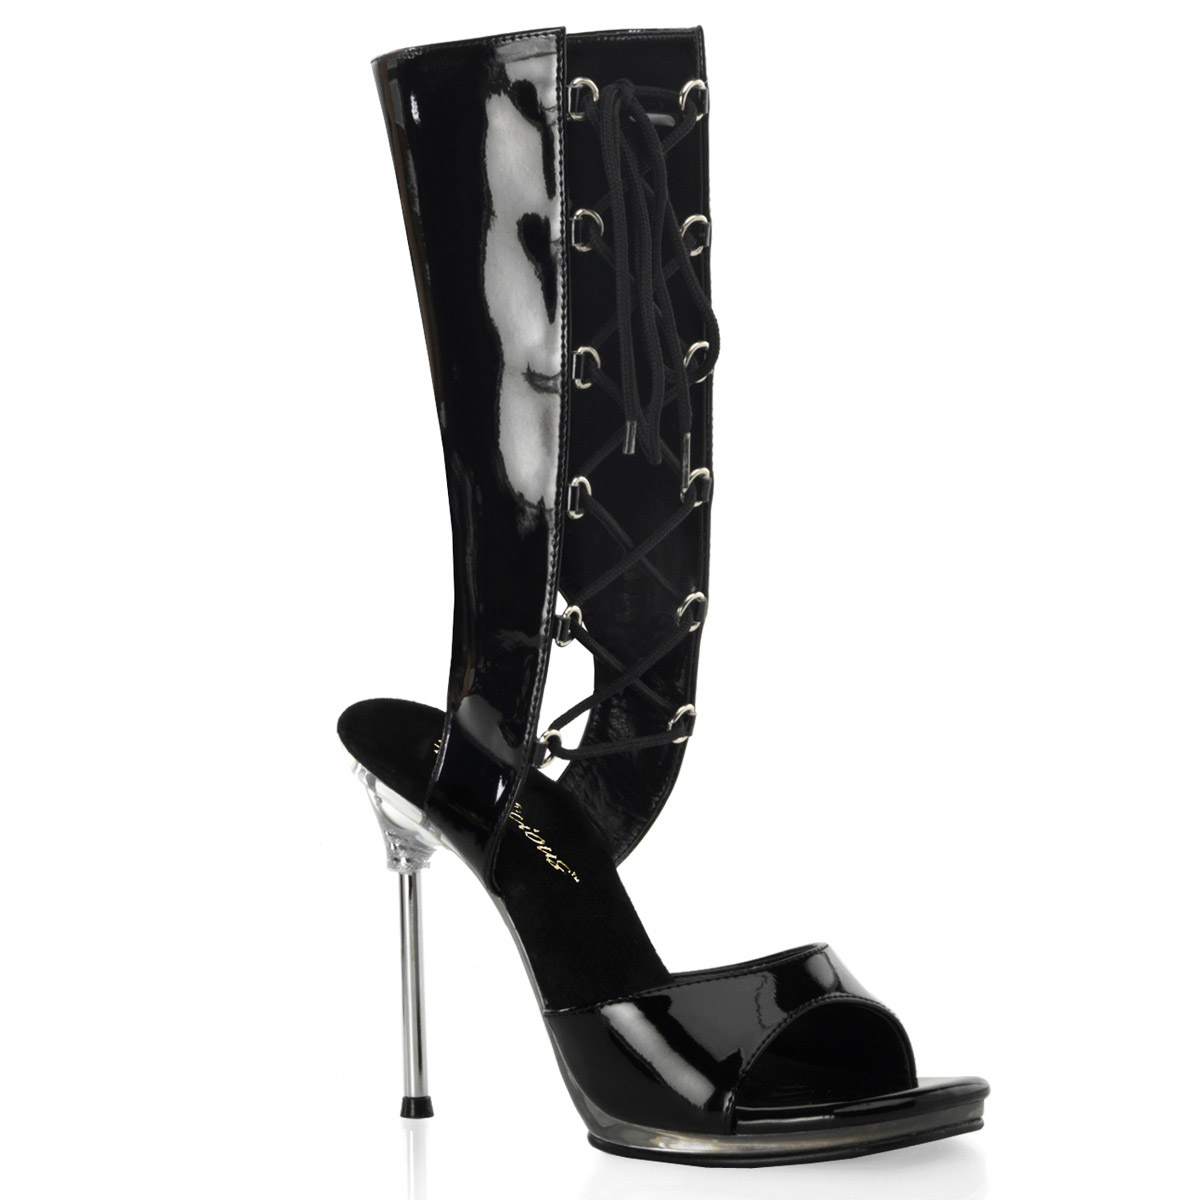 Pleaser 6 Inch Stiletto Heel 1 3/4 Inch Platform Mid-Calf Front Lace-Up Sandal 